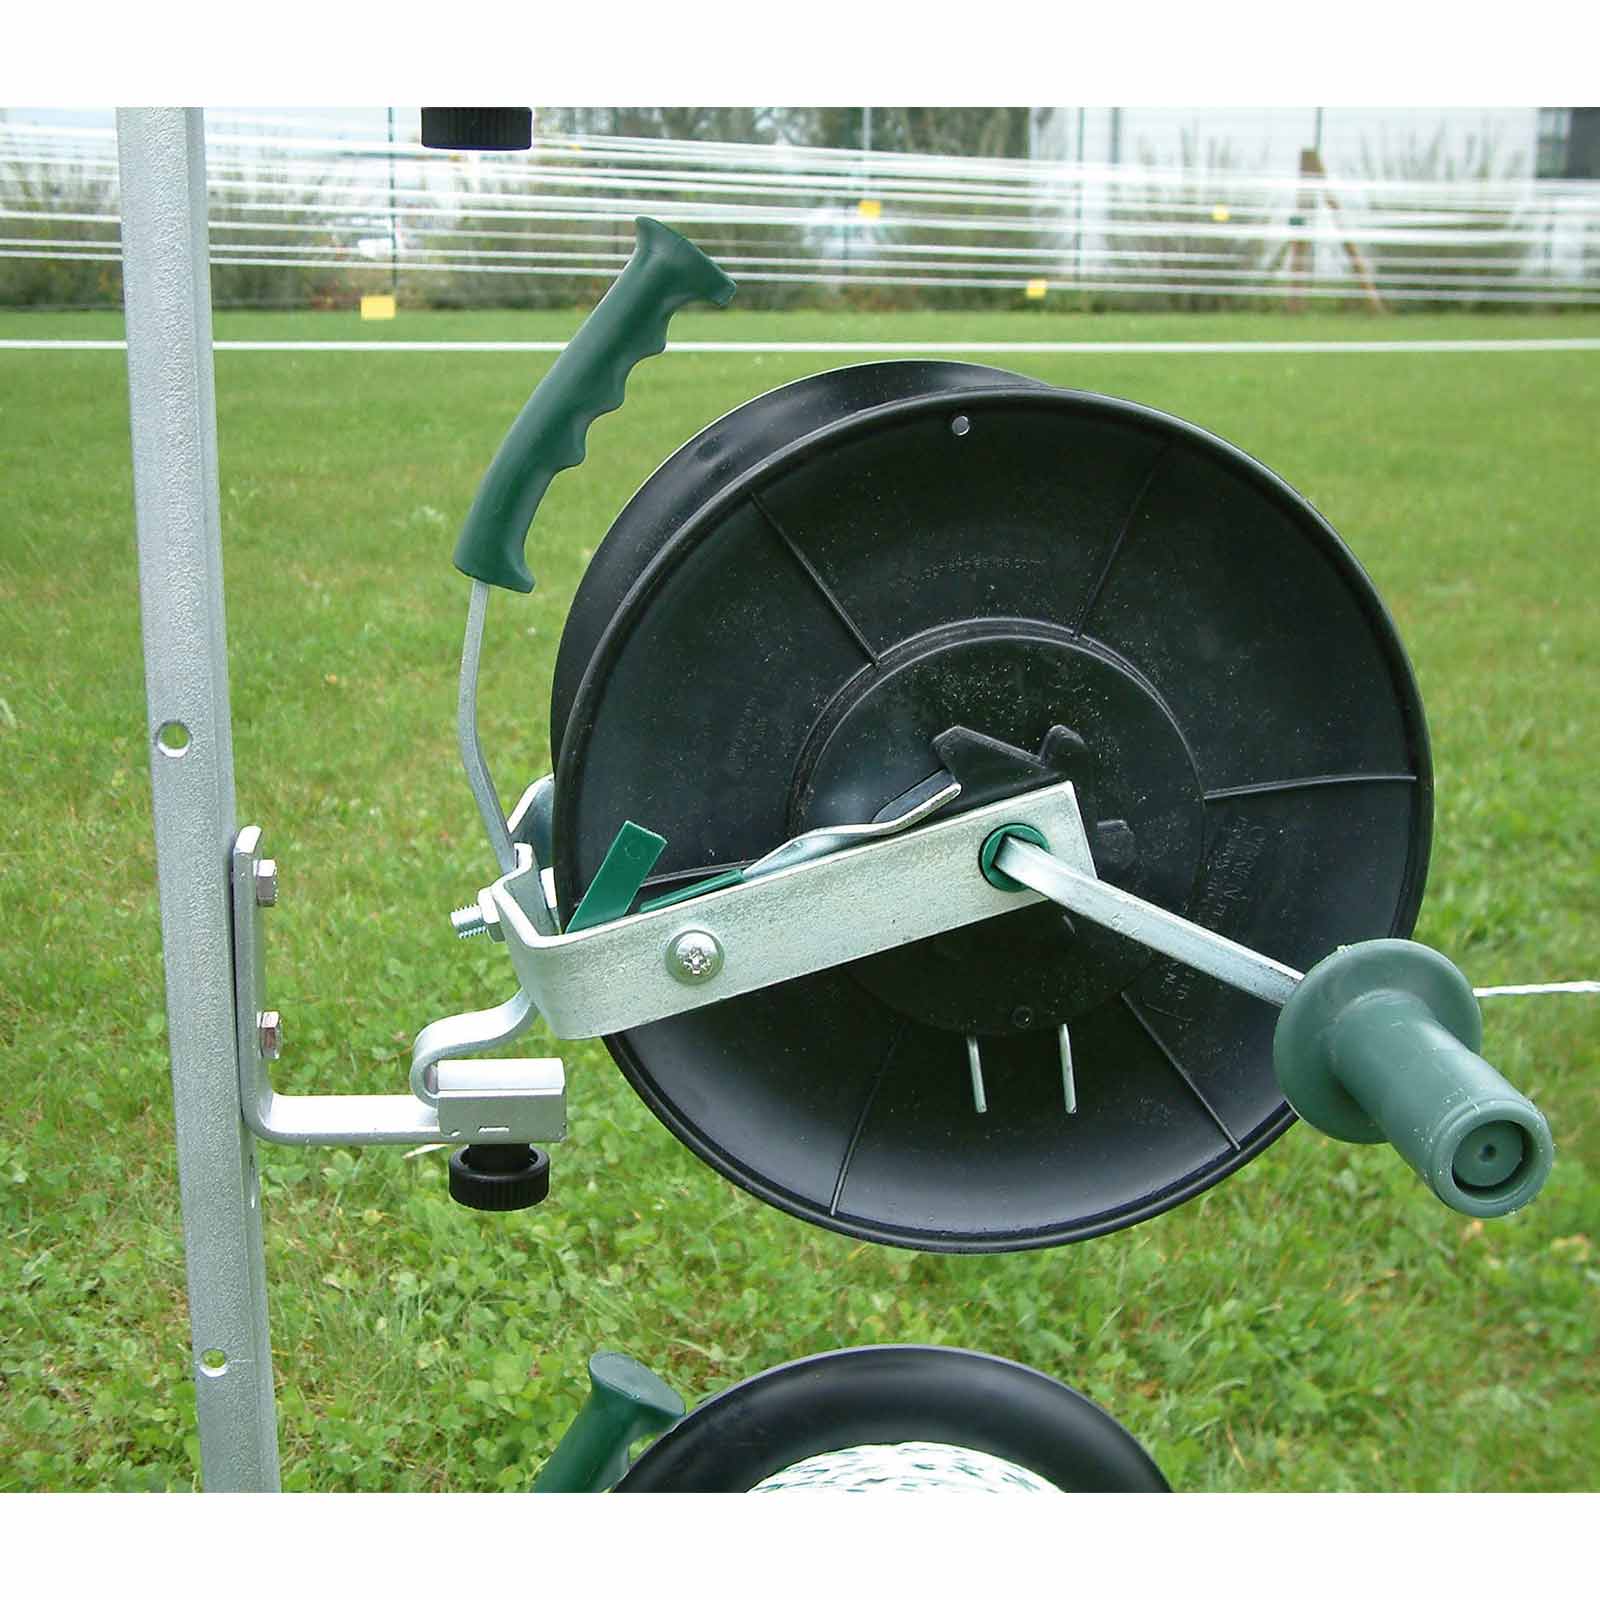 Buy Electric Fence Reel online at Agrarzone